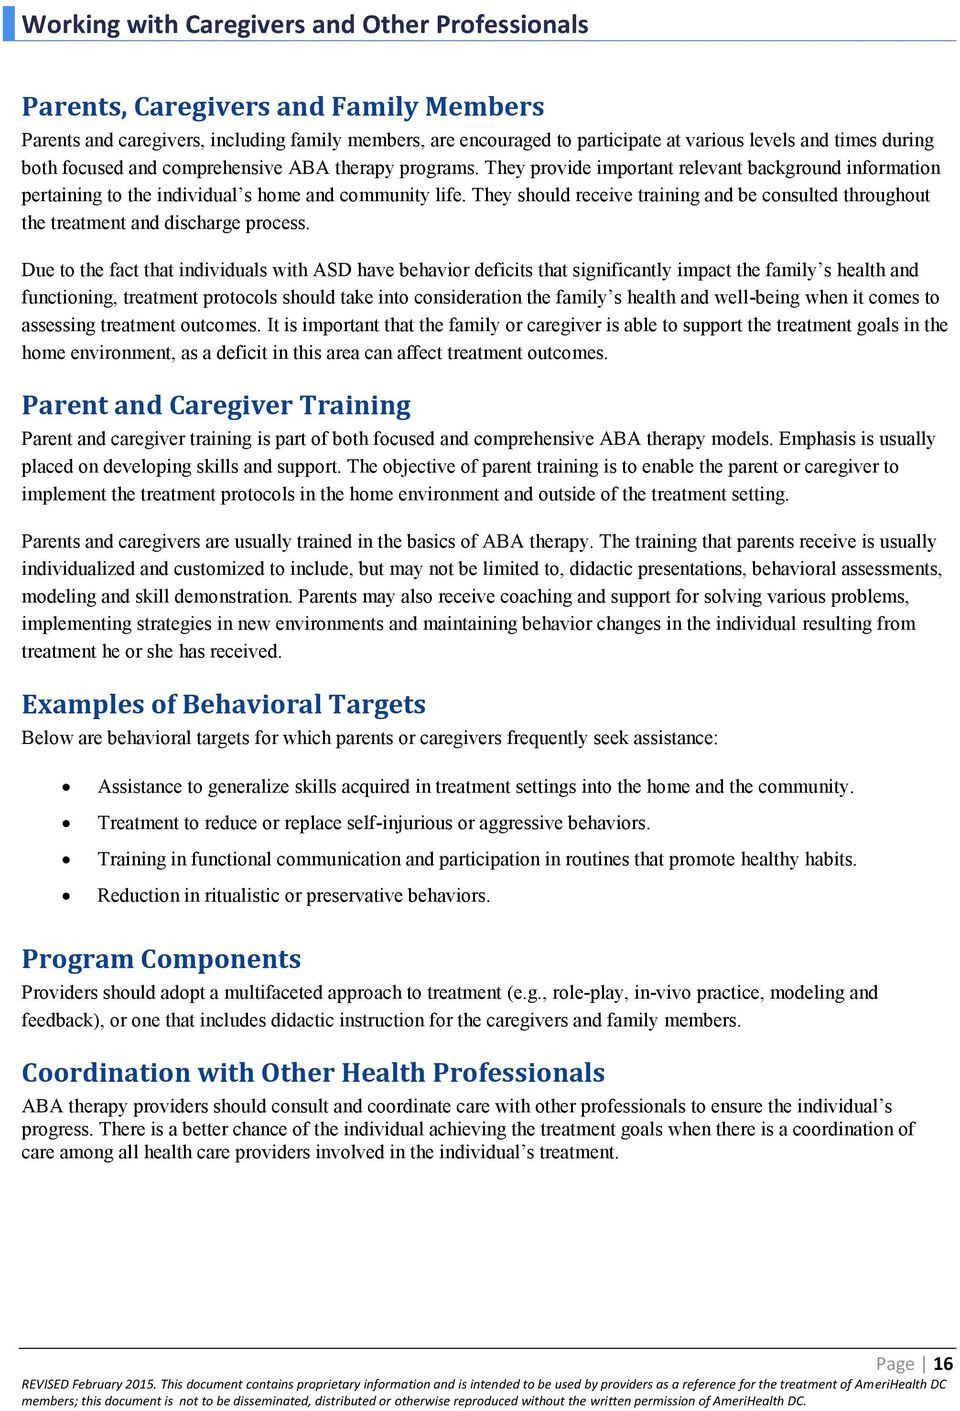 Sample Resume for Aba Caregiver Sitter Provider Guide to the Early Intervention Program – Pdf Free Download